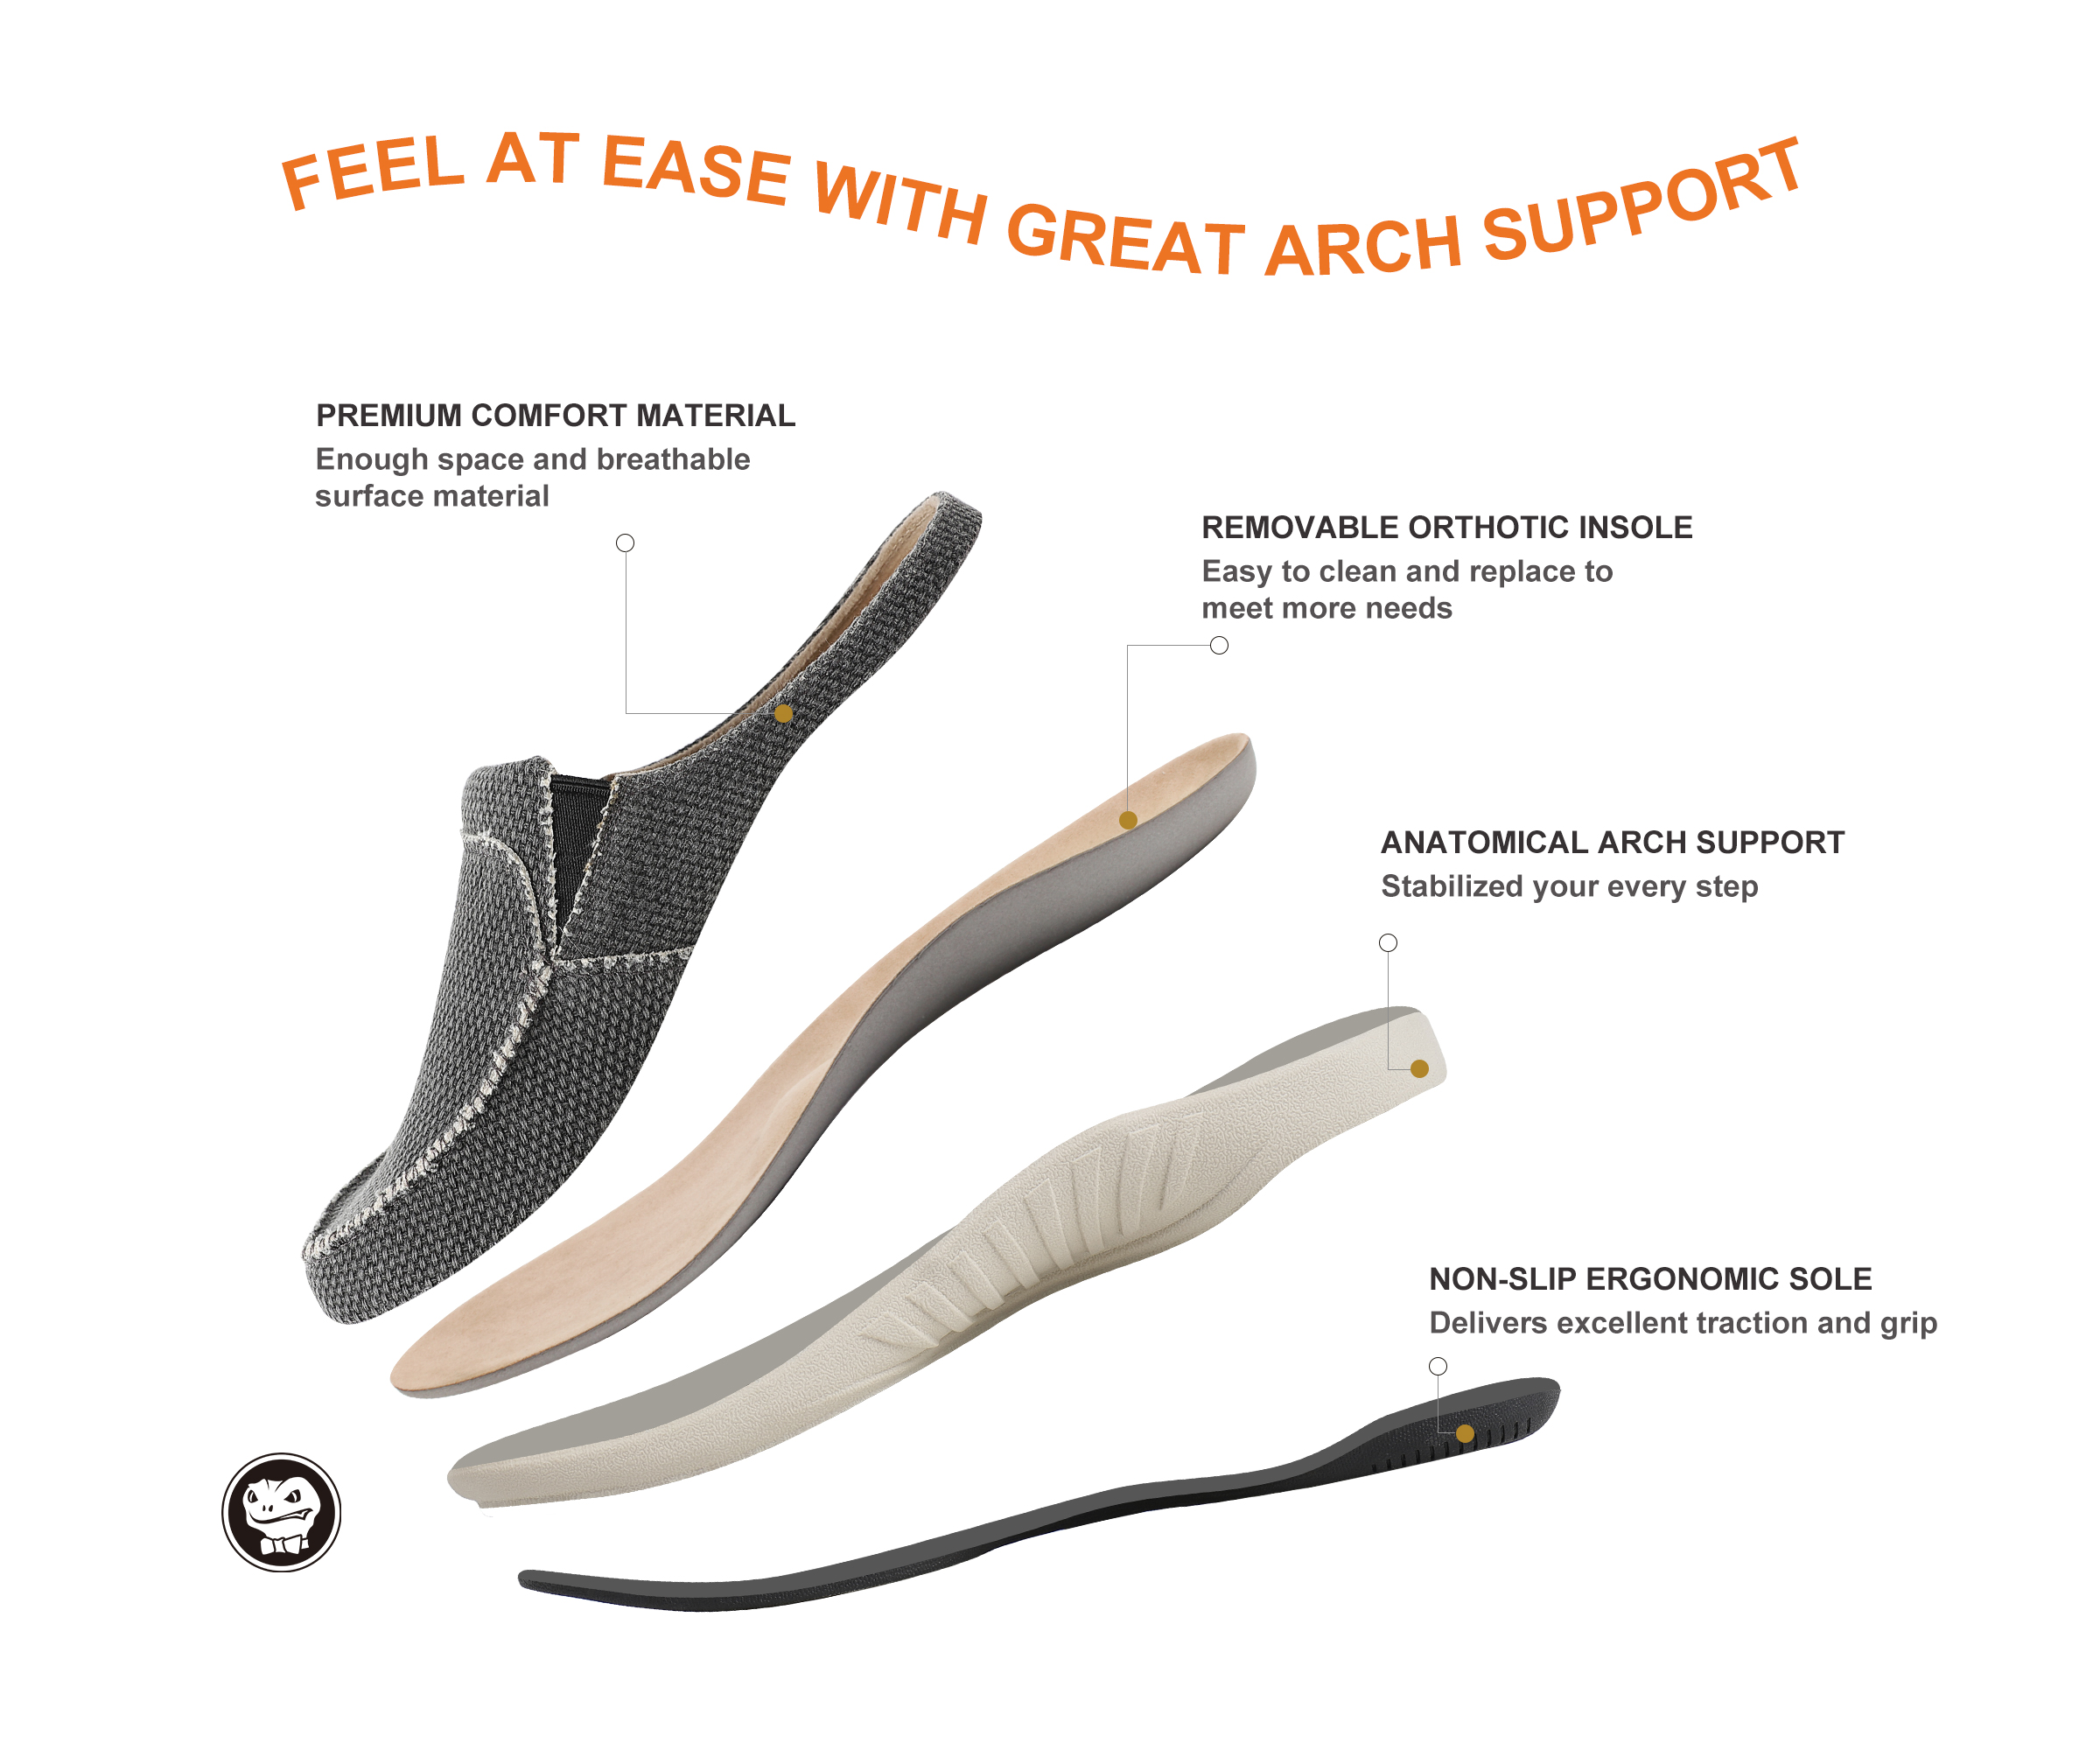 arch support slippers